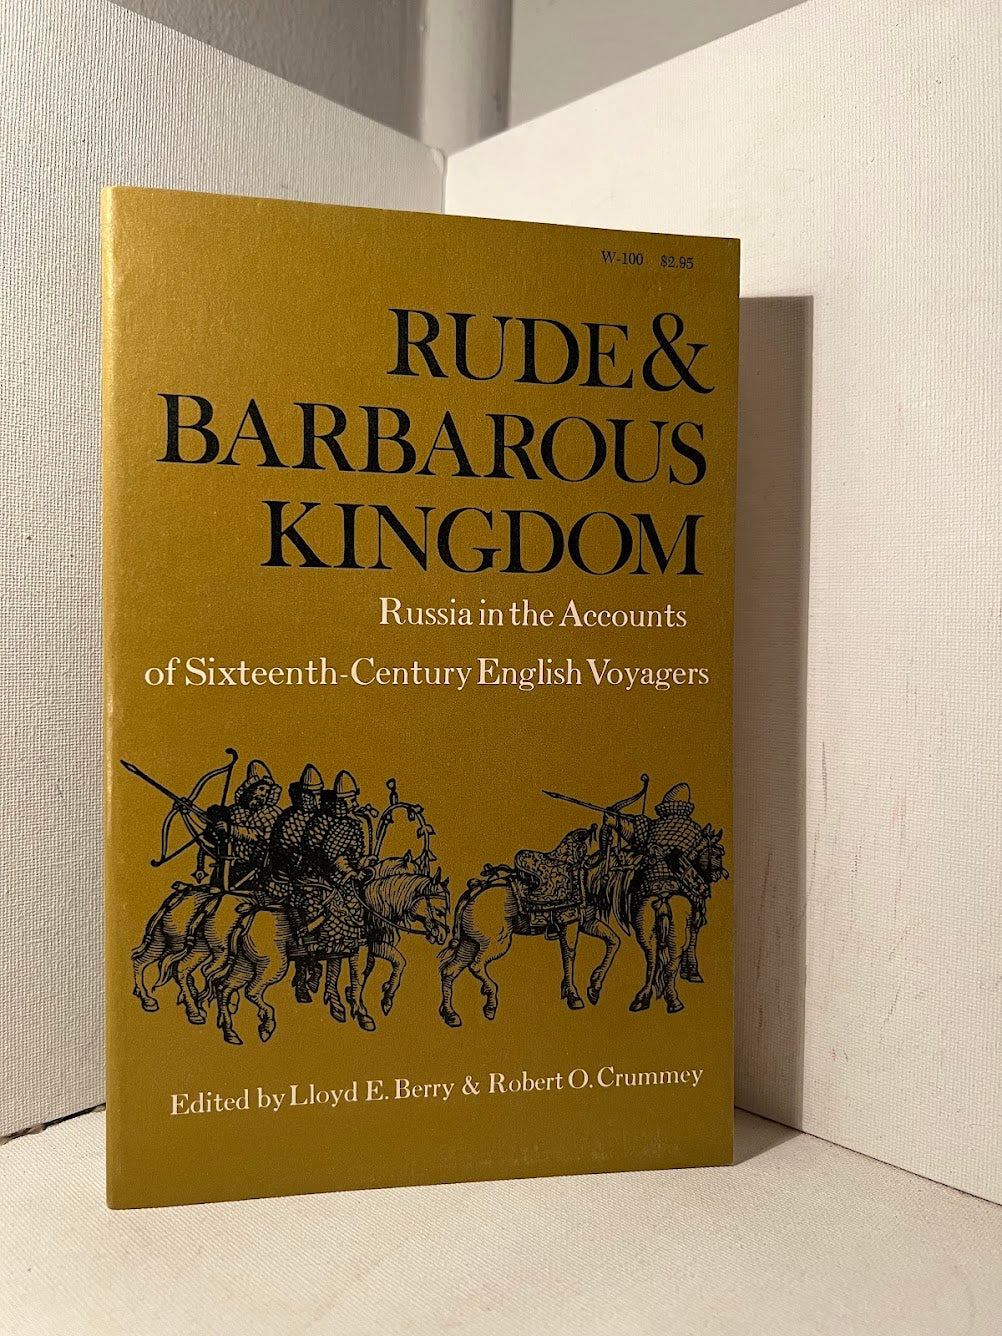 Rude & Barbarous Kingdom - Russia in the Accounts of Sixteenth-Century English Voyagers